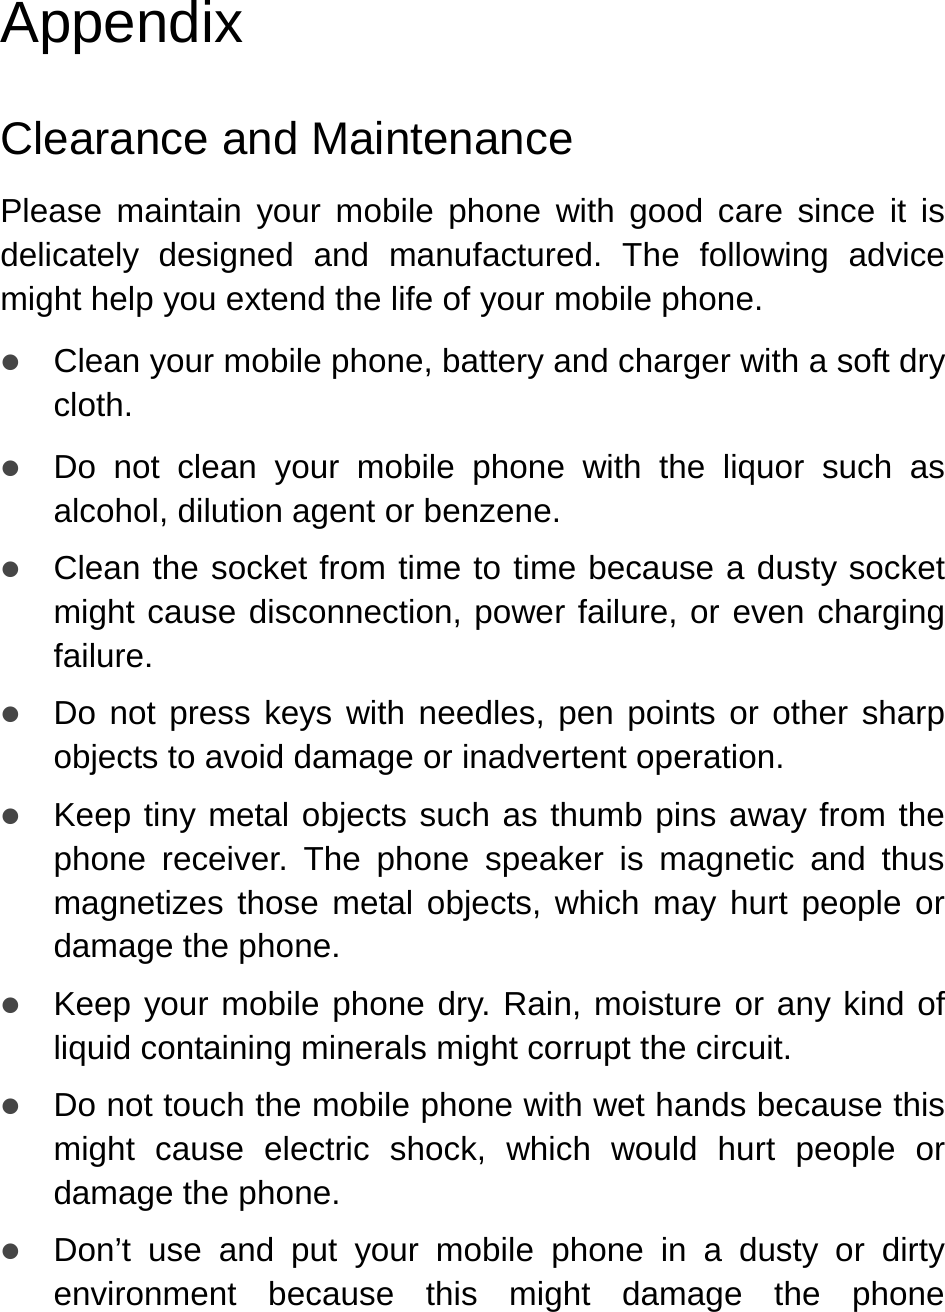   Appendix Clearance and Maintenance Please maintain your mobile phone with good care since it is delicately designed and manufactured. The following advice might help you extend the life of your mobile phone. z Clean your mobile phone, battery and charger with a soft dry cloth. z Do not clean your mobile phone with the liquor such as alcohol, dilution agent or benzene. z Clean the socket from time to time because a dusty socket might cause disconnection, power failure, or even charging failure. z Do not press keys with needles, pen points or other sharp objects to avoid damage or inadvertent operation.  z Keep tiny metal objects such as thumb pins away from the phone receiver. The phone speaker is magnetic and thus magnetizes those metal objects, which may hurt people or damage the phone. z Keep your mobile phone dry. Rain, moisture or any kind of liquid containing minerals might corrupt the circuit.   z Do not touch the mobile phone with wet hands because this might cause electric shock, which would hurt people or damage the phone. z Don’t use and put your mobile phone in a dusty or dirty environment because this might damage the phone 